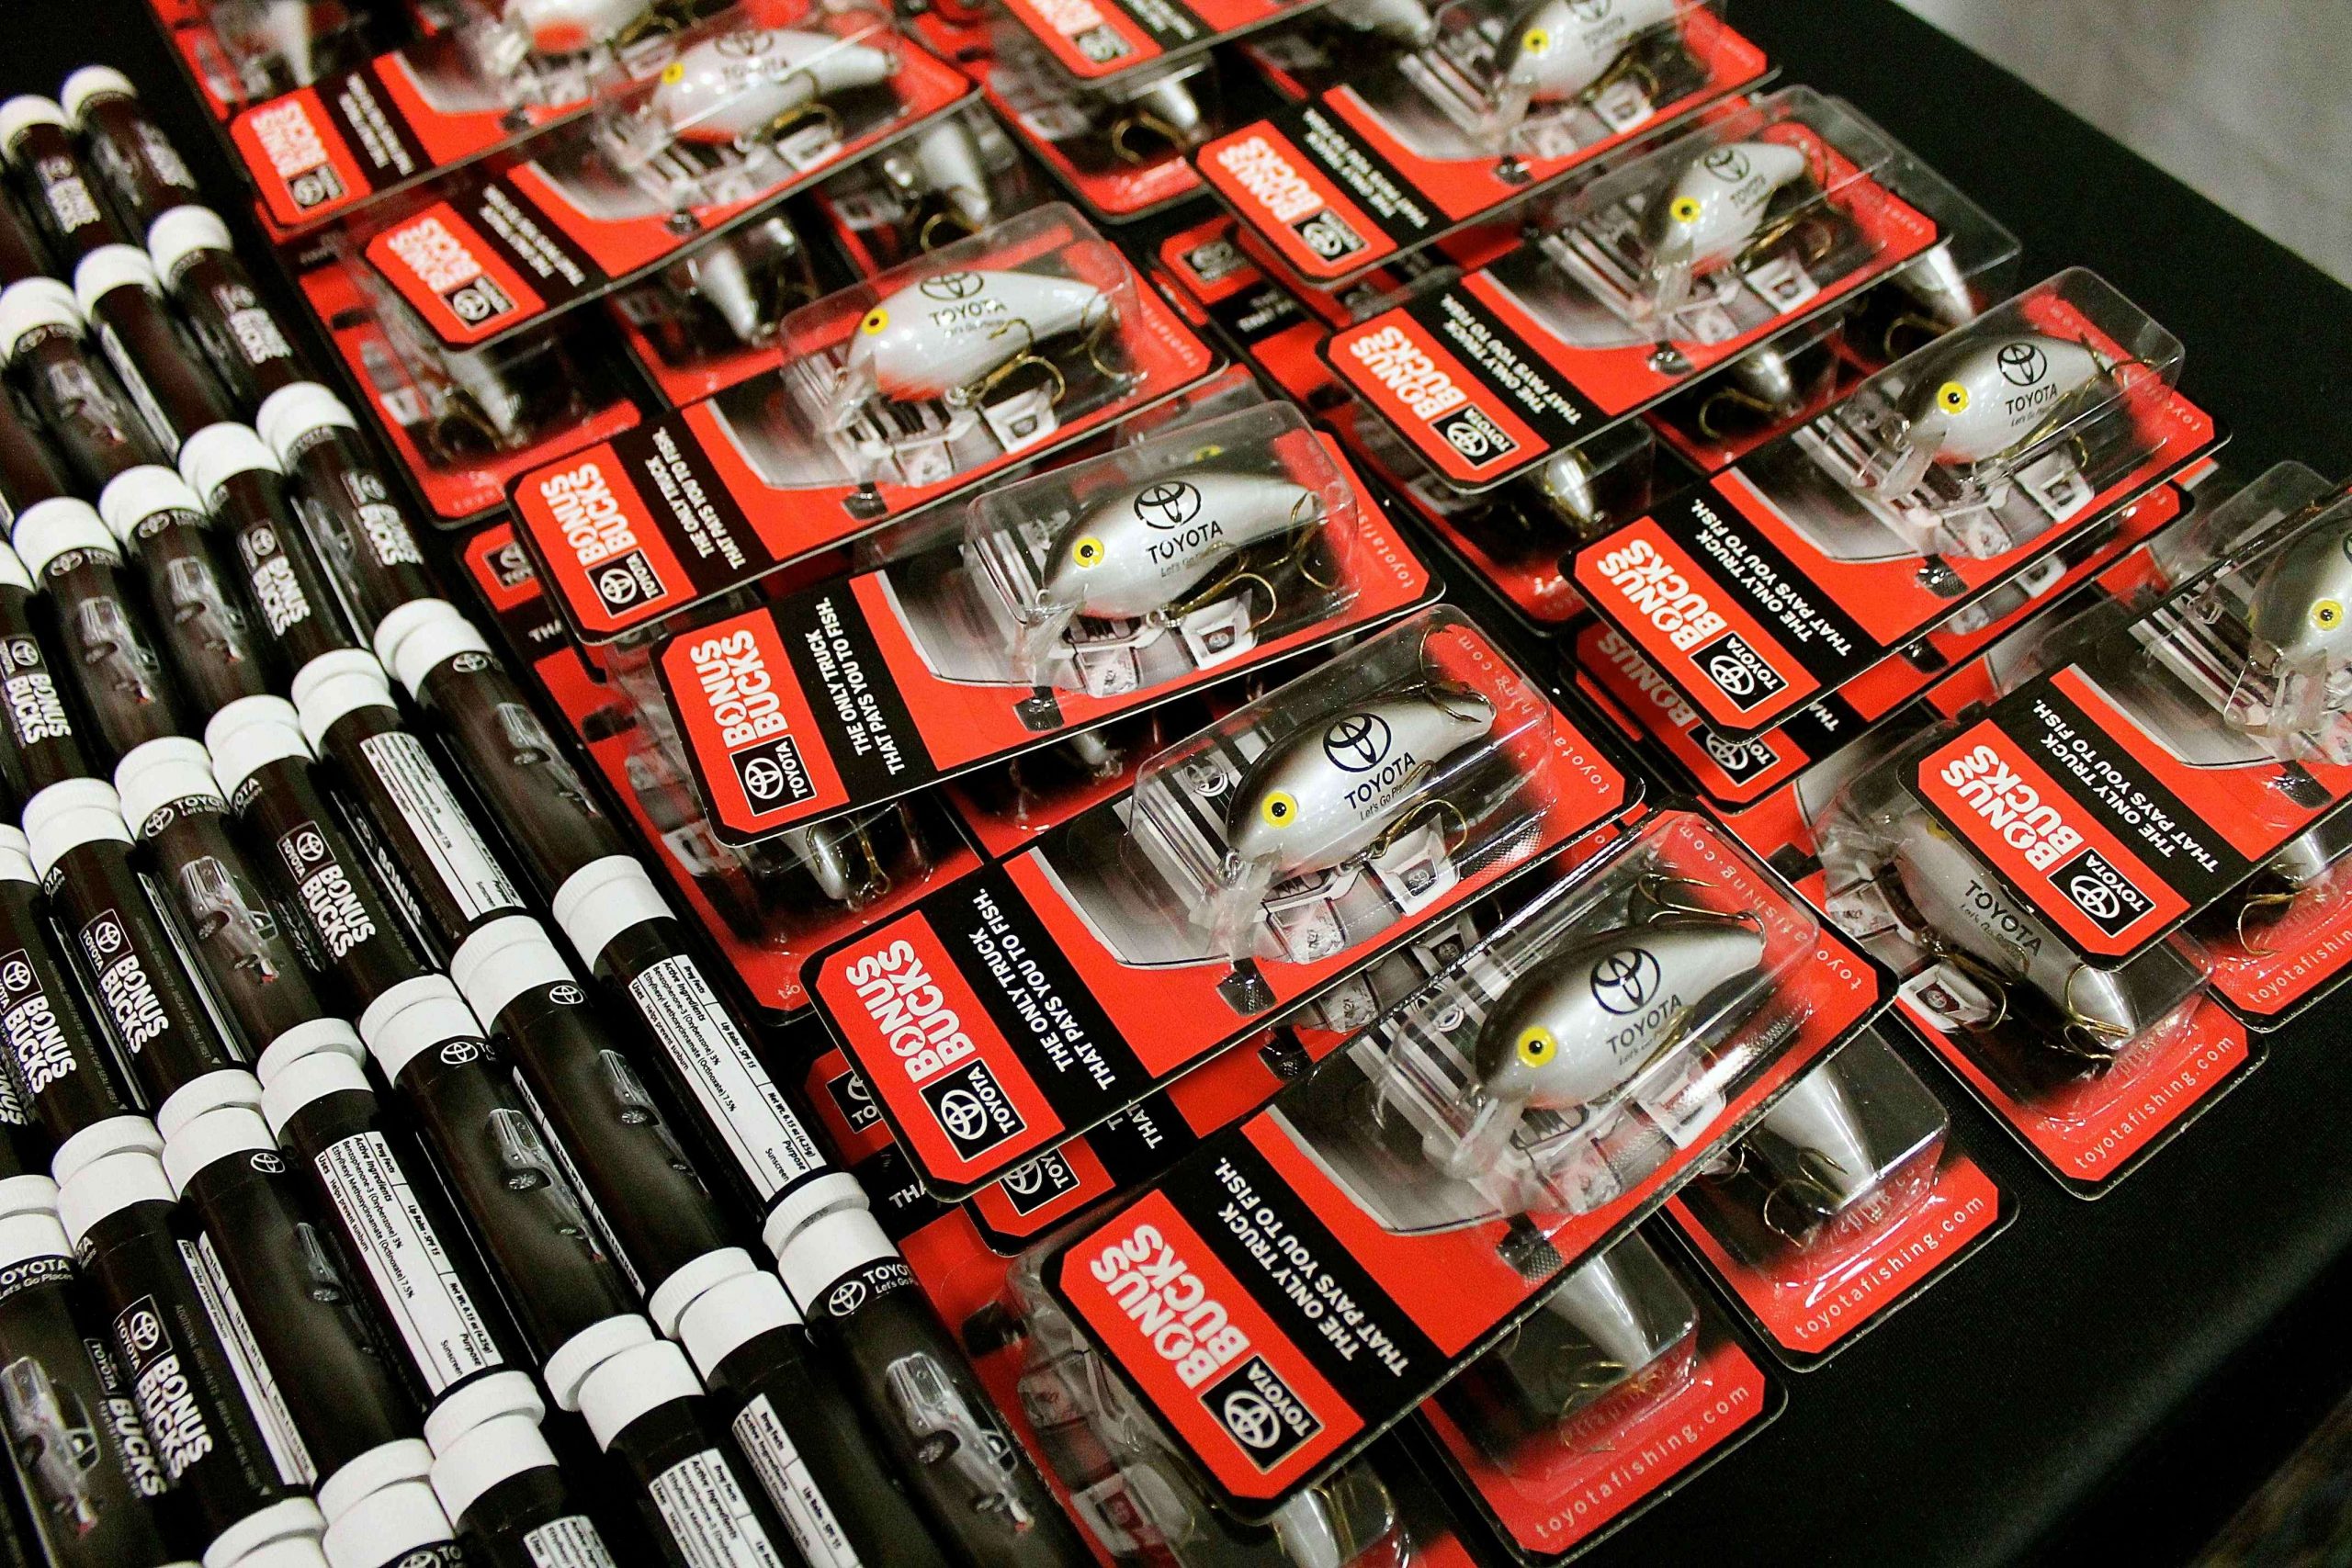 B.A.S.S. sponsor Toyota provides Central Divisional competitors with logo lures and lip balm.
